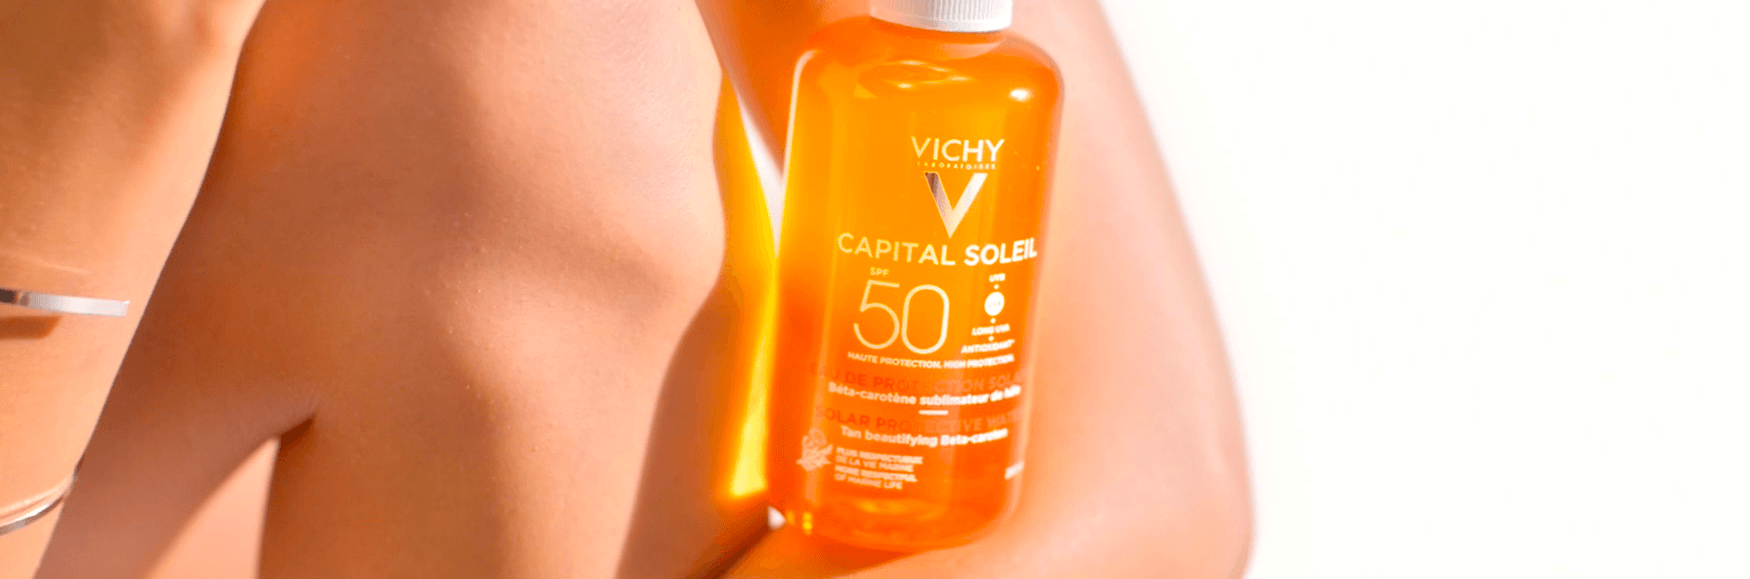 Vichy solar water x 87seconds